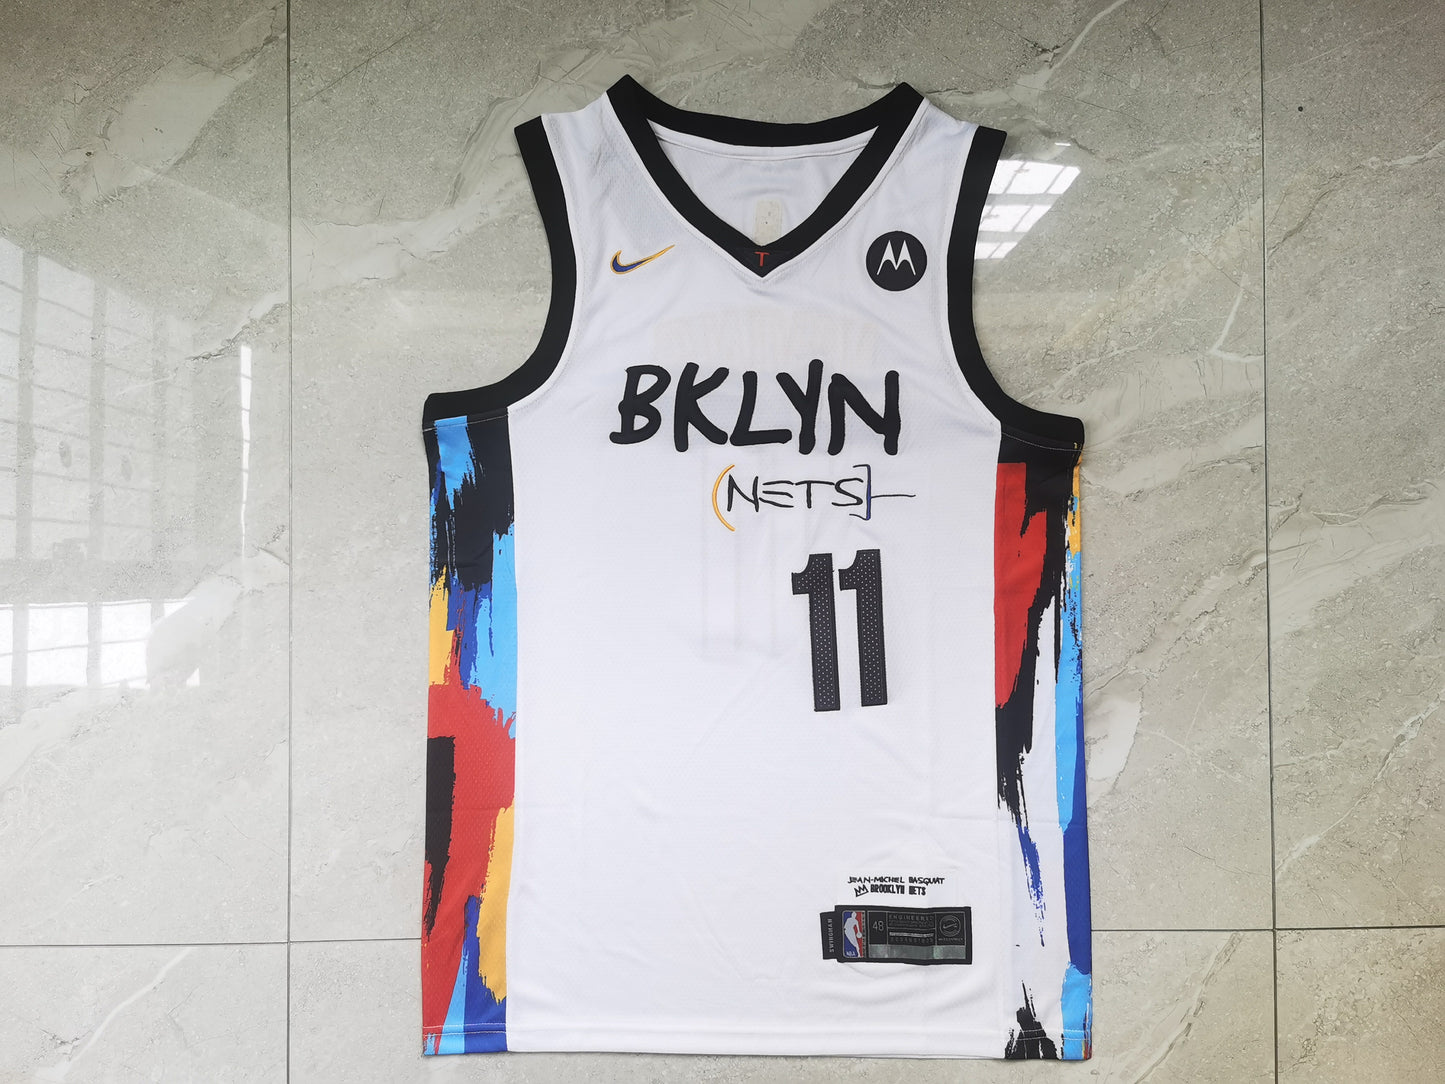 NBA Brooklyn Nets 2021 (Kevin Durant, James Harden, Kyrie Irving) All Special Kits